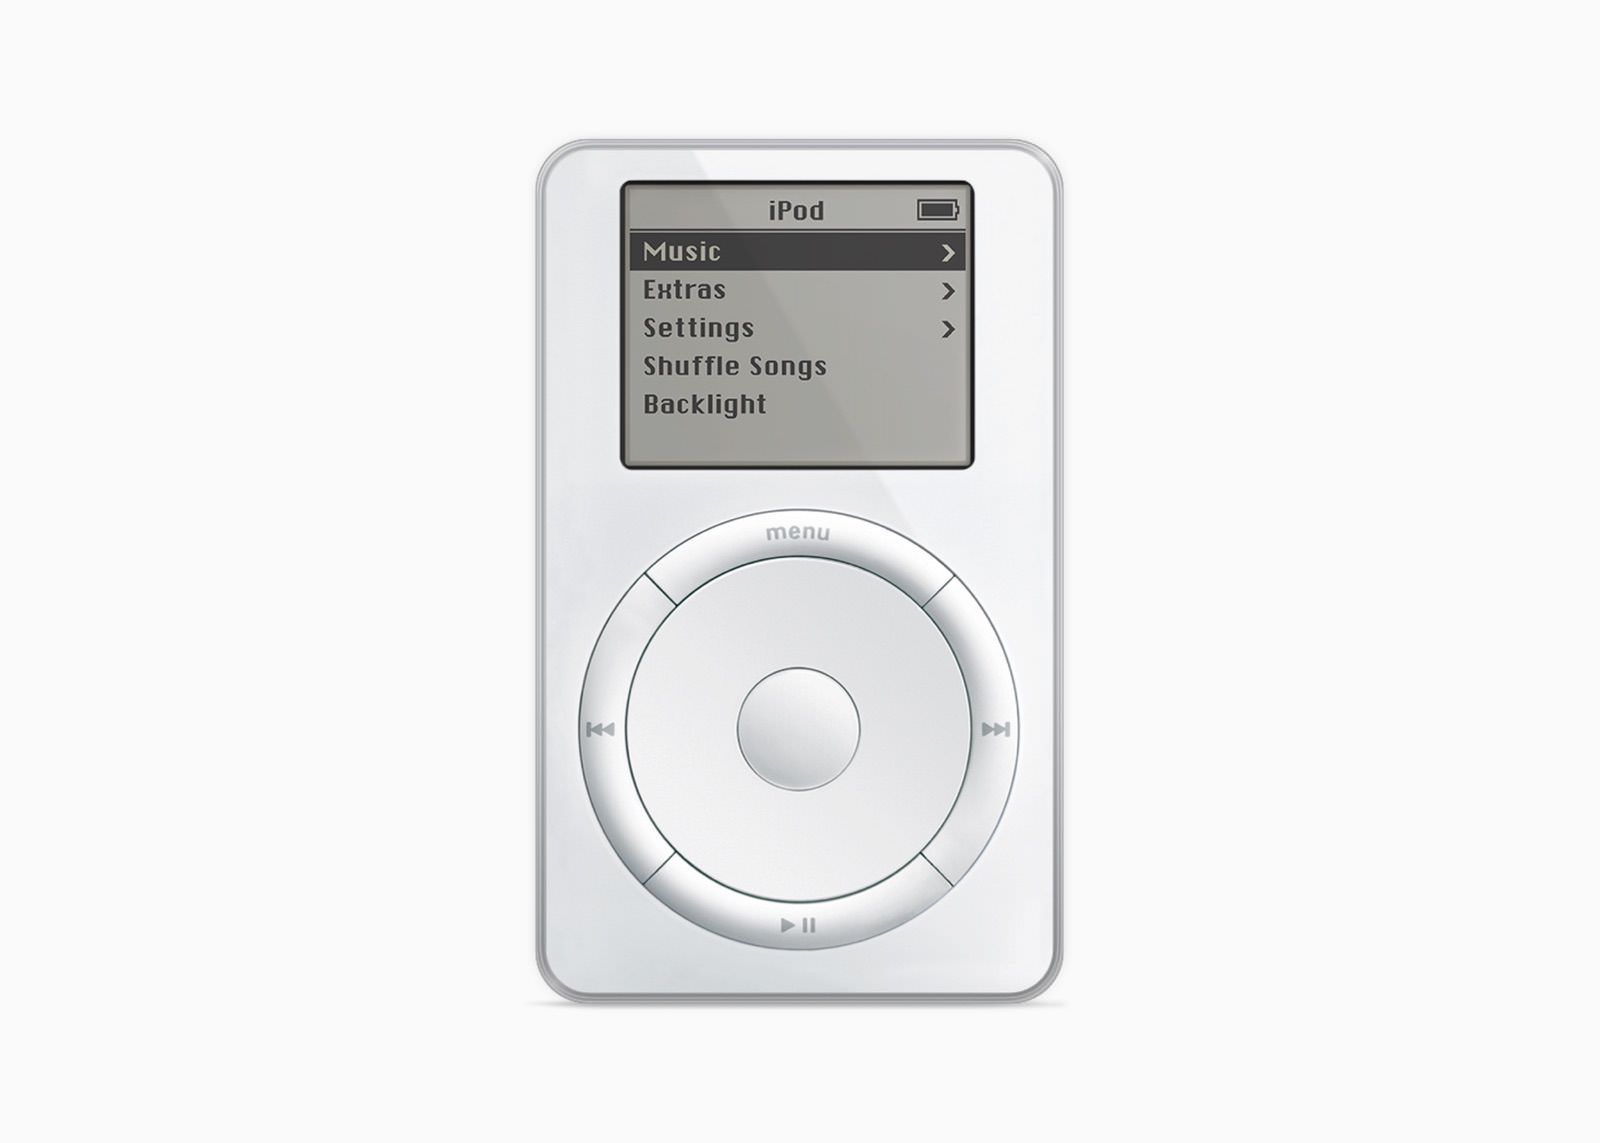 Apple-iPod-end-of-life-iPod-first-generation.jpg